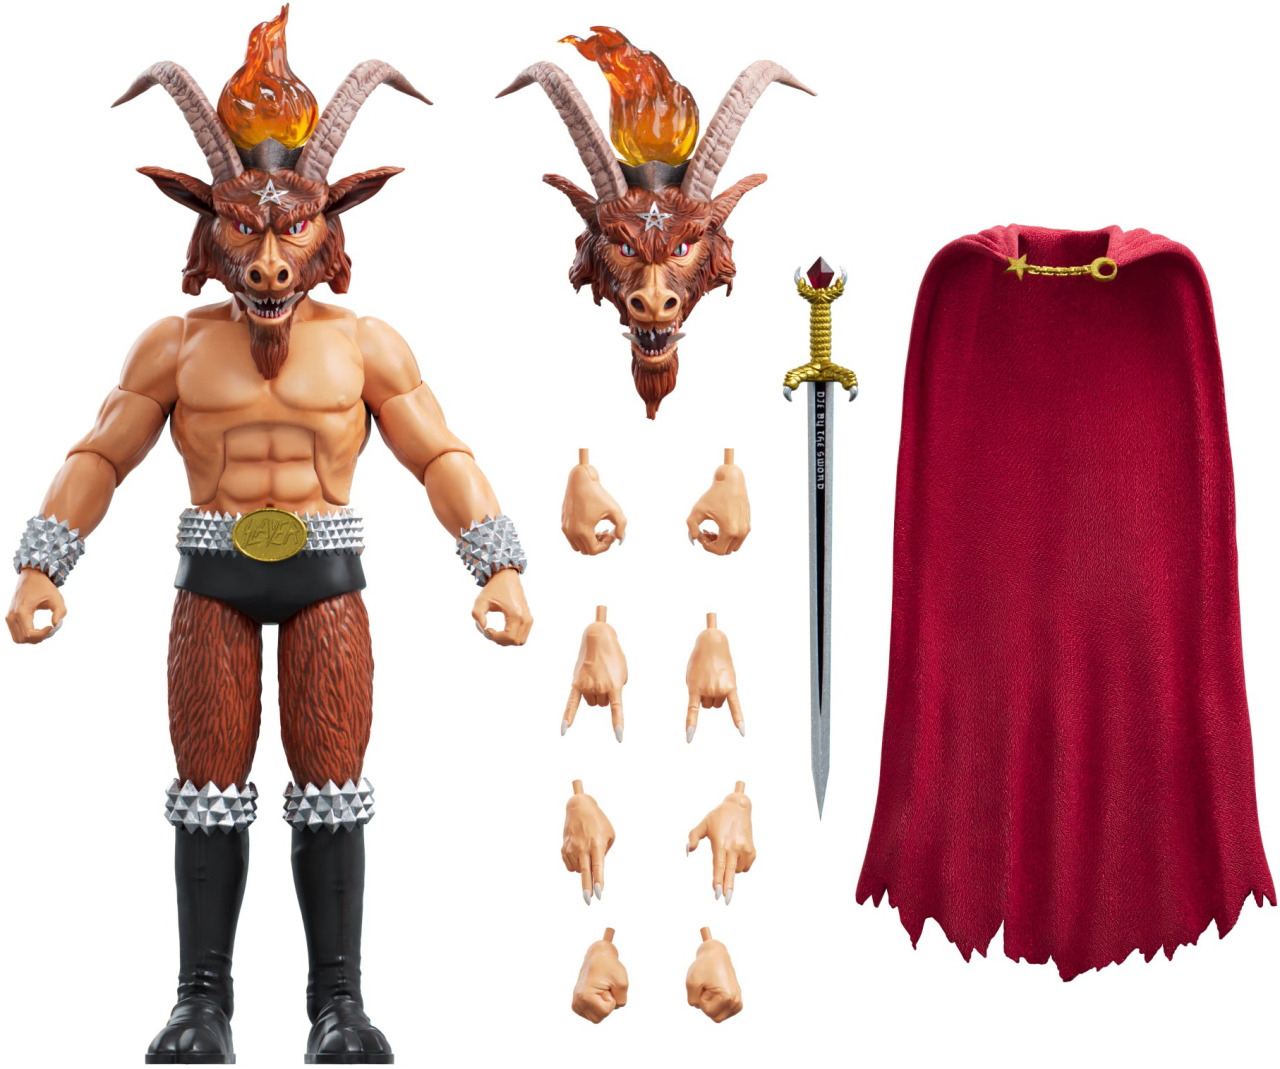 The minotaur from the cover of Slayer’s 1983 debut album, Show No Mercy, is joining Super 7’s Ultimates toy line. Expected to be delivered in July 2023, its available to pre-order for $55 until June 24.The 8” action figure comes with two interchangeable heads, ten interchangeable hands, sword, and cape. Its housed in a slipcase box (pictured below). #slayer #show no mercy #thrash metal#tom araya#kerry king#jeff hanneman#dave lombardo #metal blade records #super 7#toy#gift #reign in blood #minotaur#heavy metal#thrash